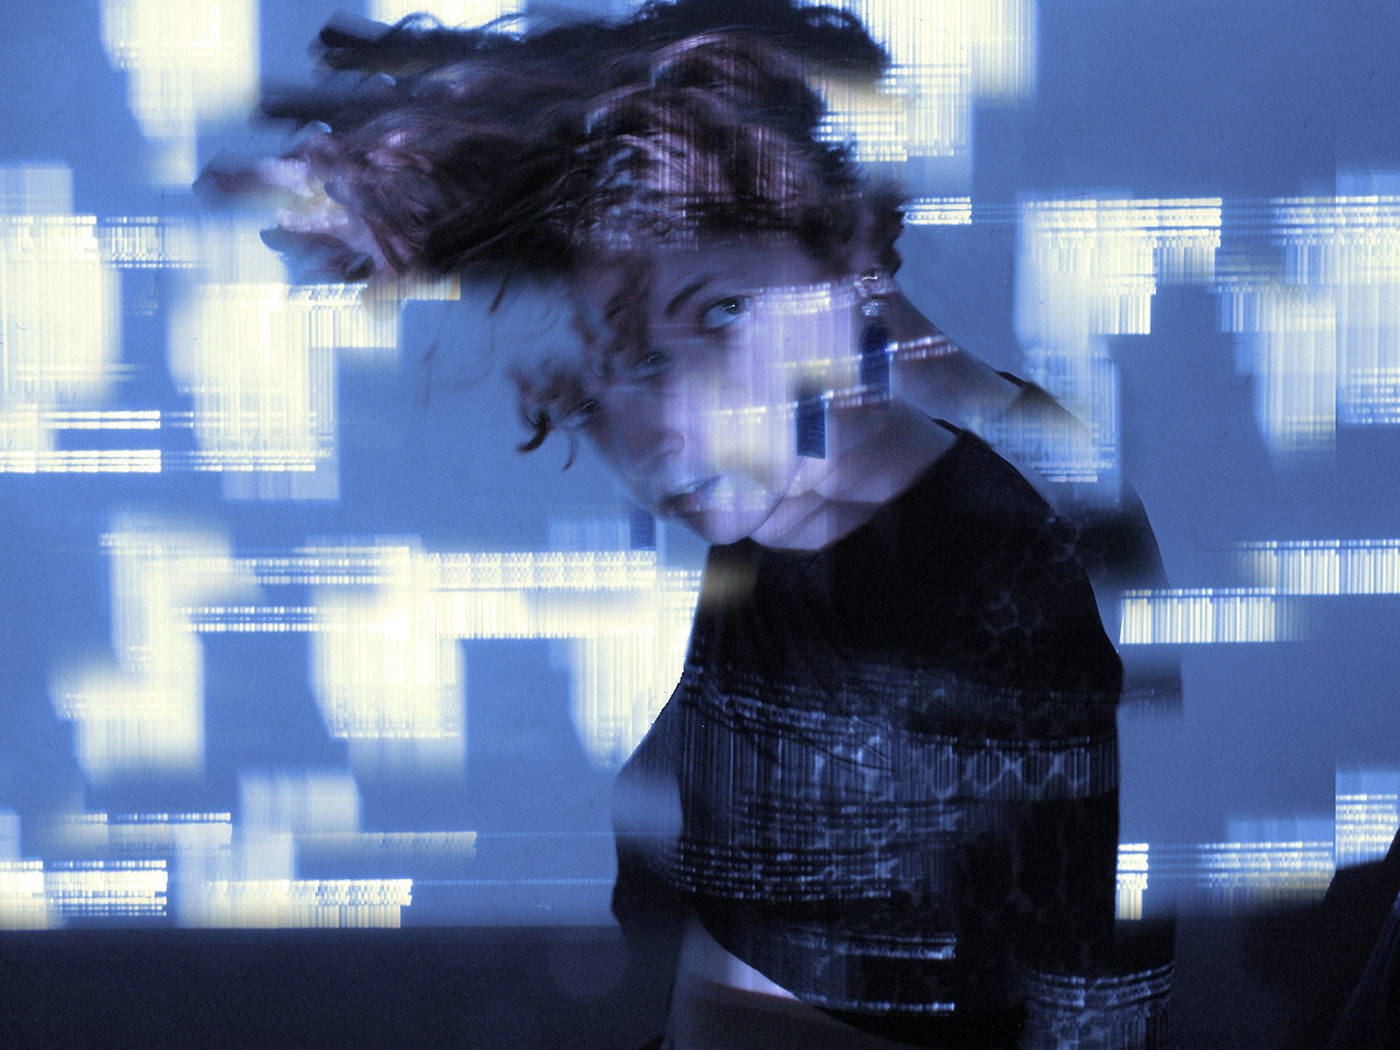 A photo of Flor de Fuego, her head in motion turning toward the camera, with digital glitches projected over her face